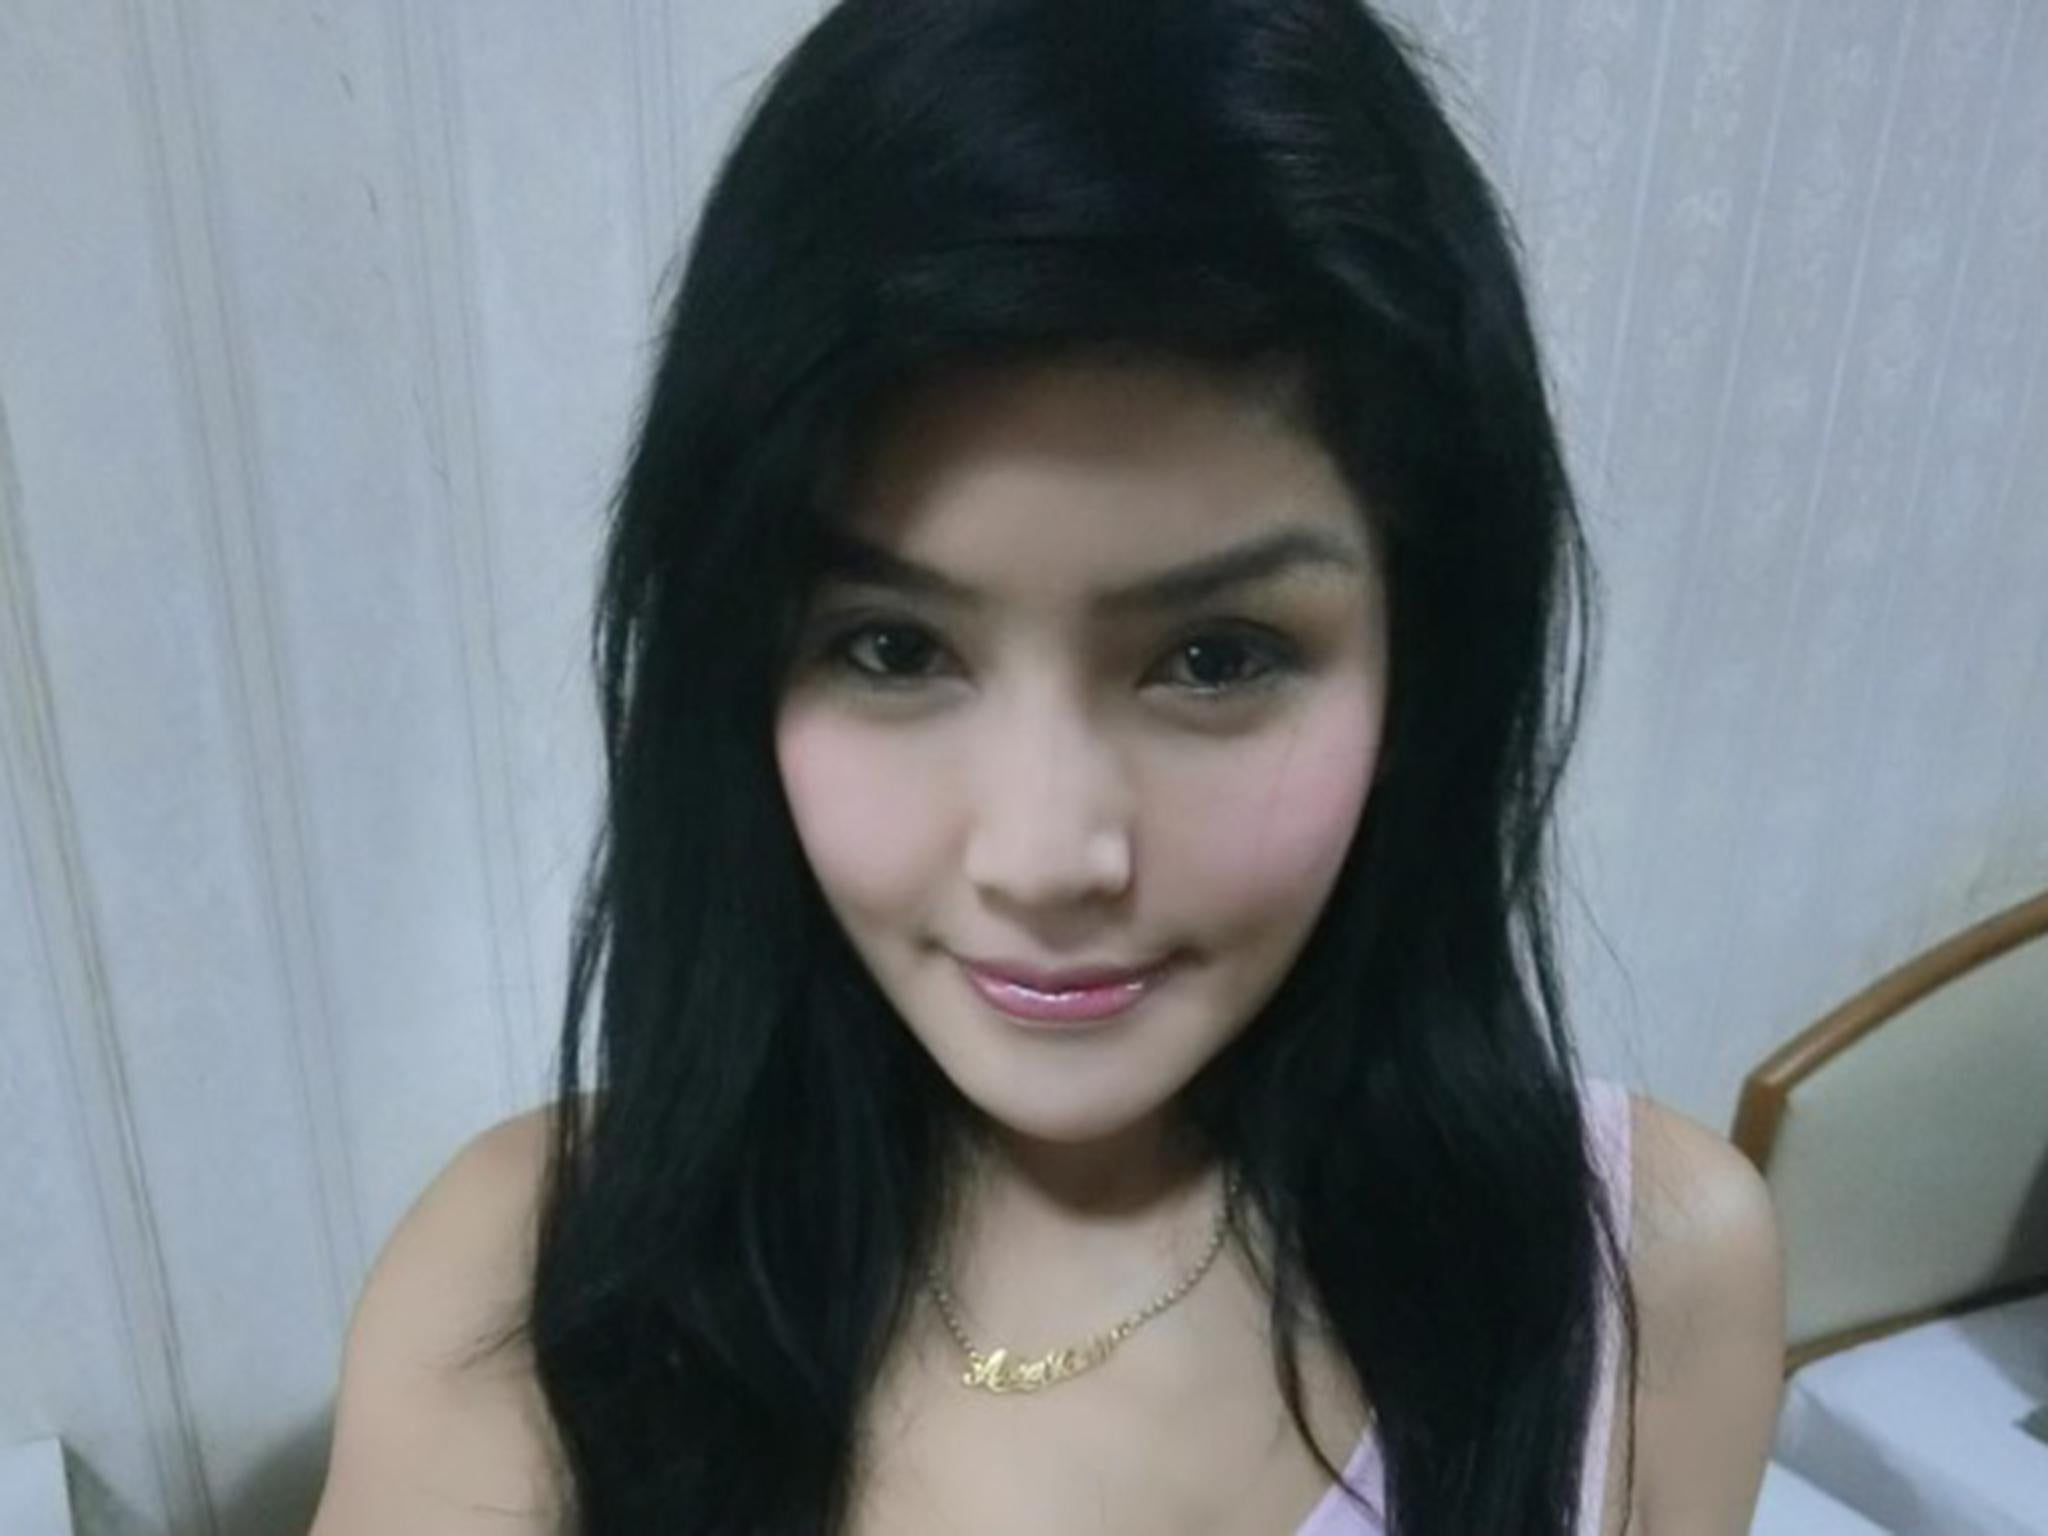 Mom Tech 16girl Xxx - Thai ex-model charged with human trafficking after selling 16-year-old for  sex | The Independent | The Independent